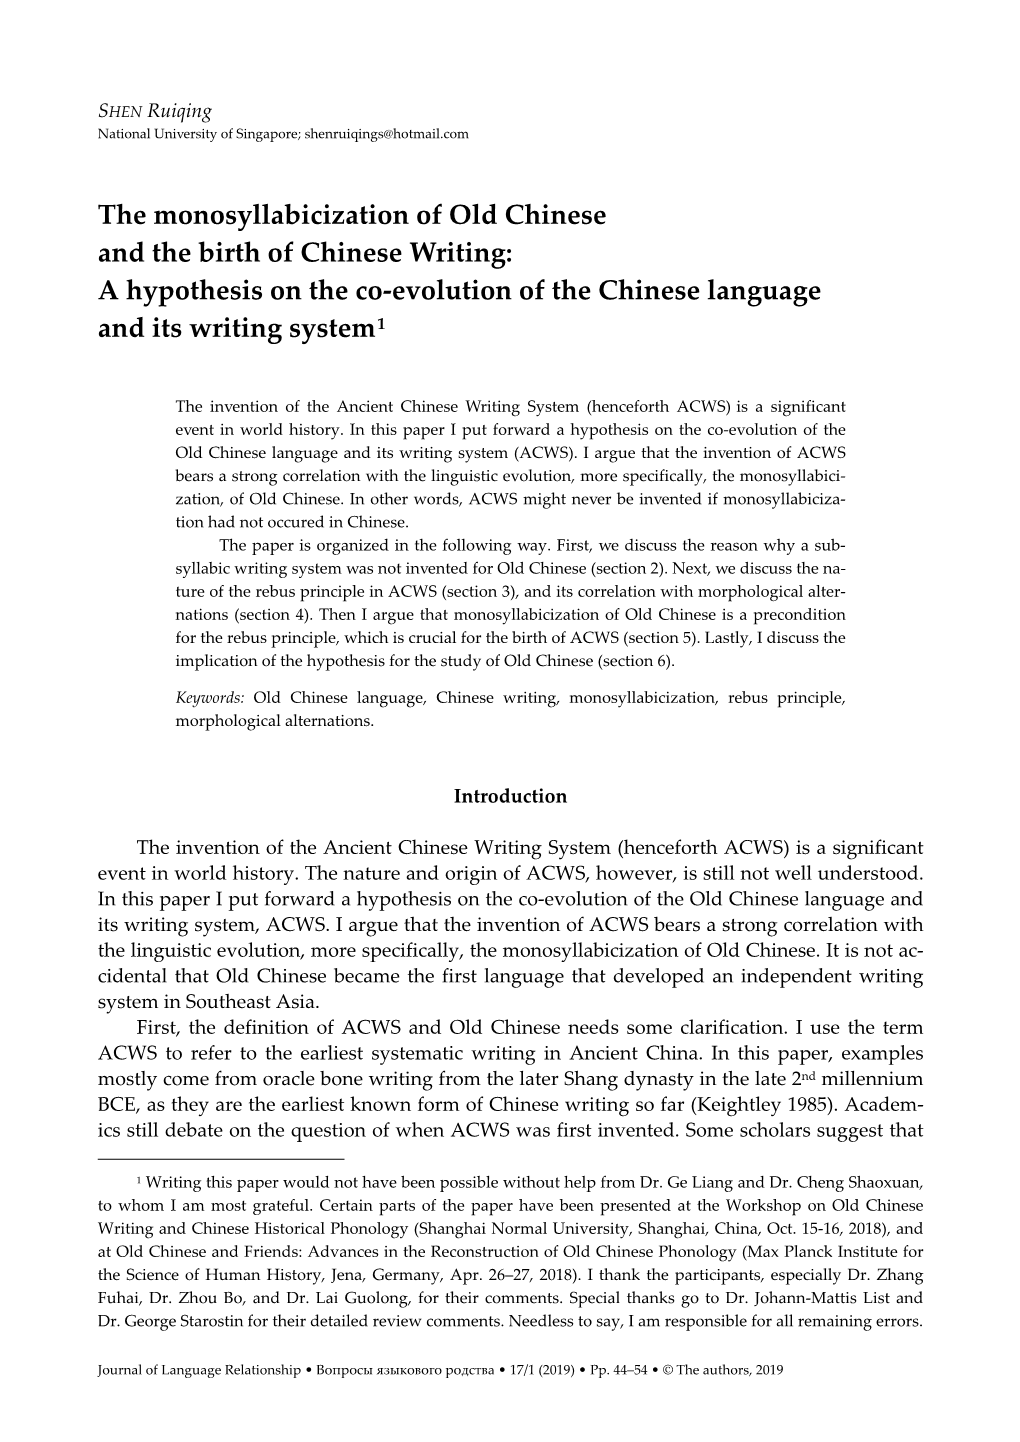 The Monosyllabicization of Old Chinese and the Birth of Chinese Writing: a Hypothesis on the Co-Evolution of the Chinese Language and Its Writing System1